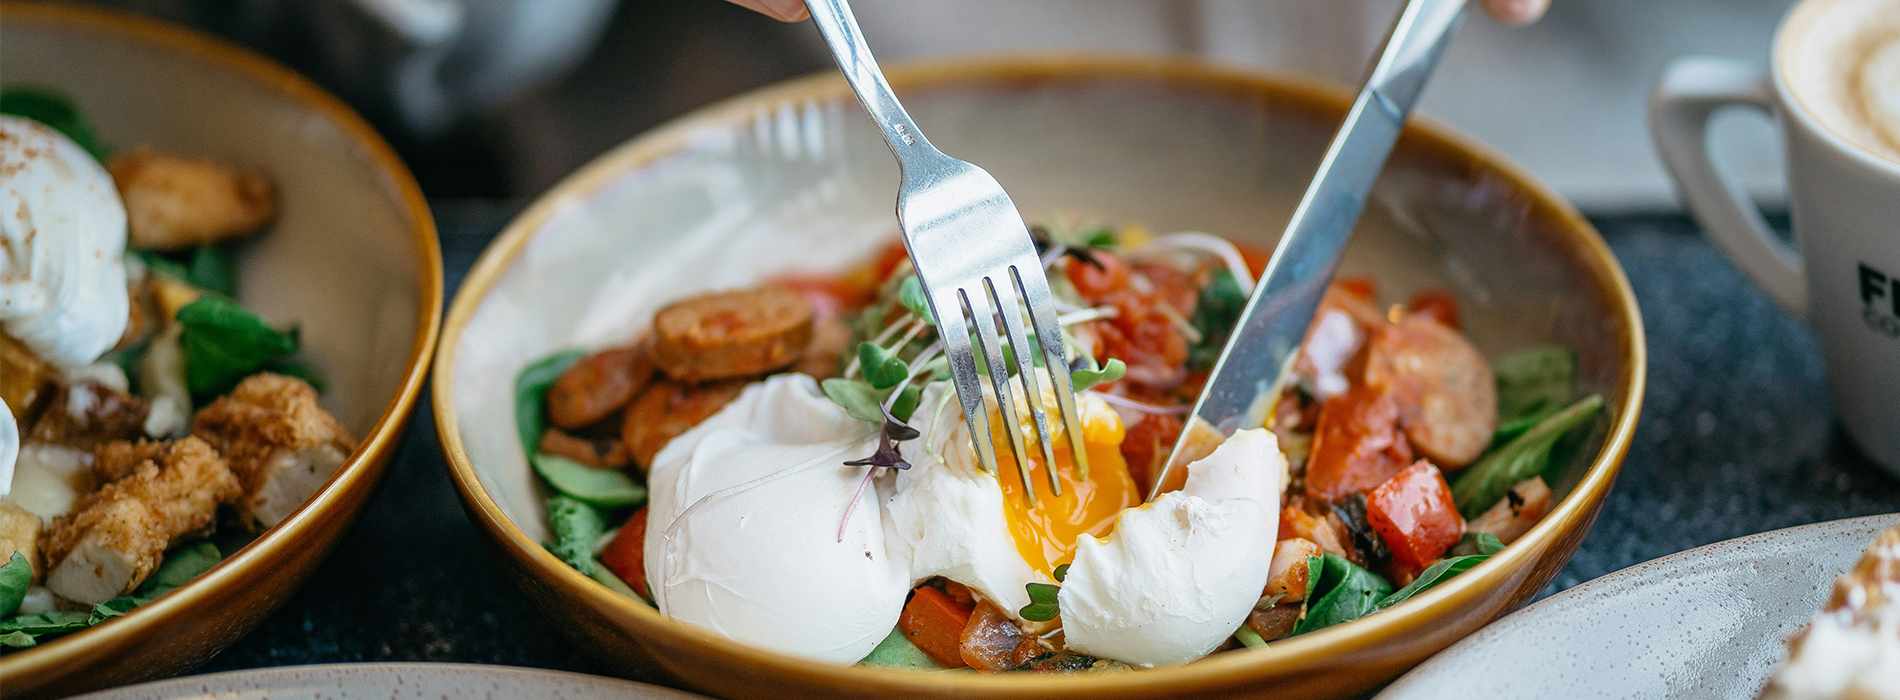 9+1 top spots for a delicious brunch in Cyprus